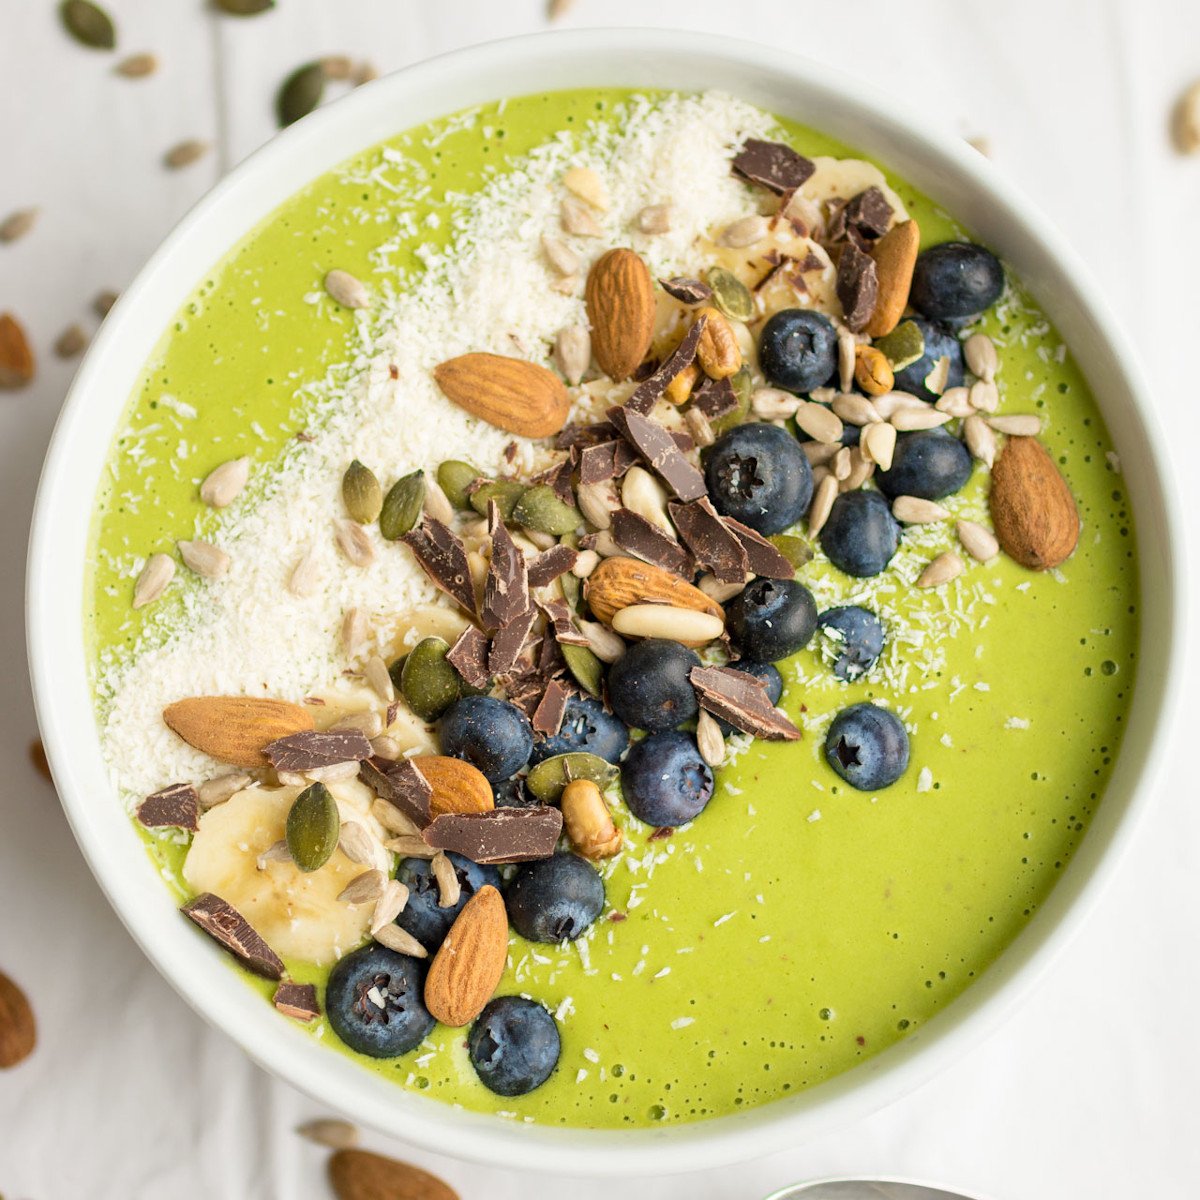 Green Smoothie bowl topped with almonds, blueberries, seeds and chocolate.